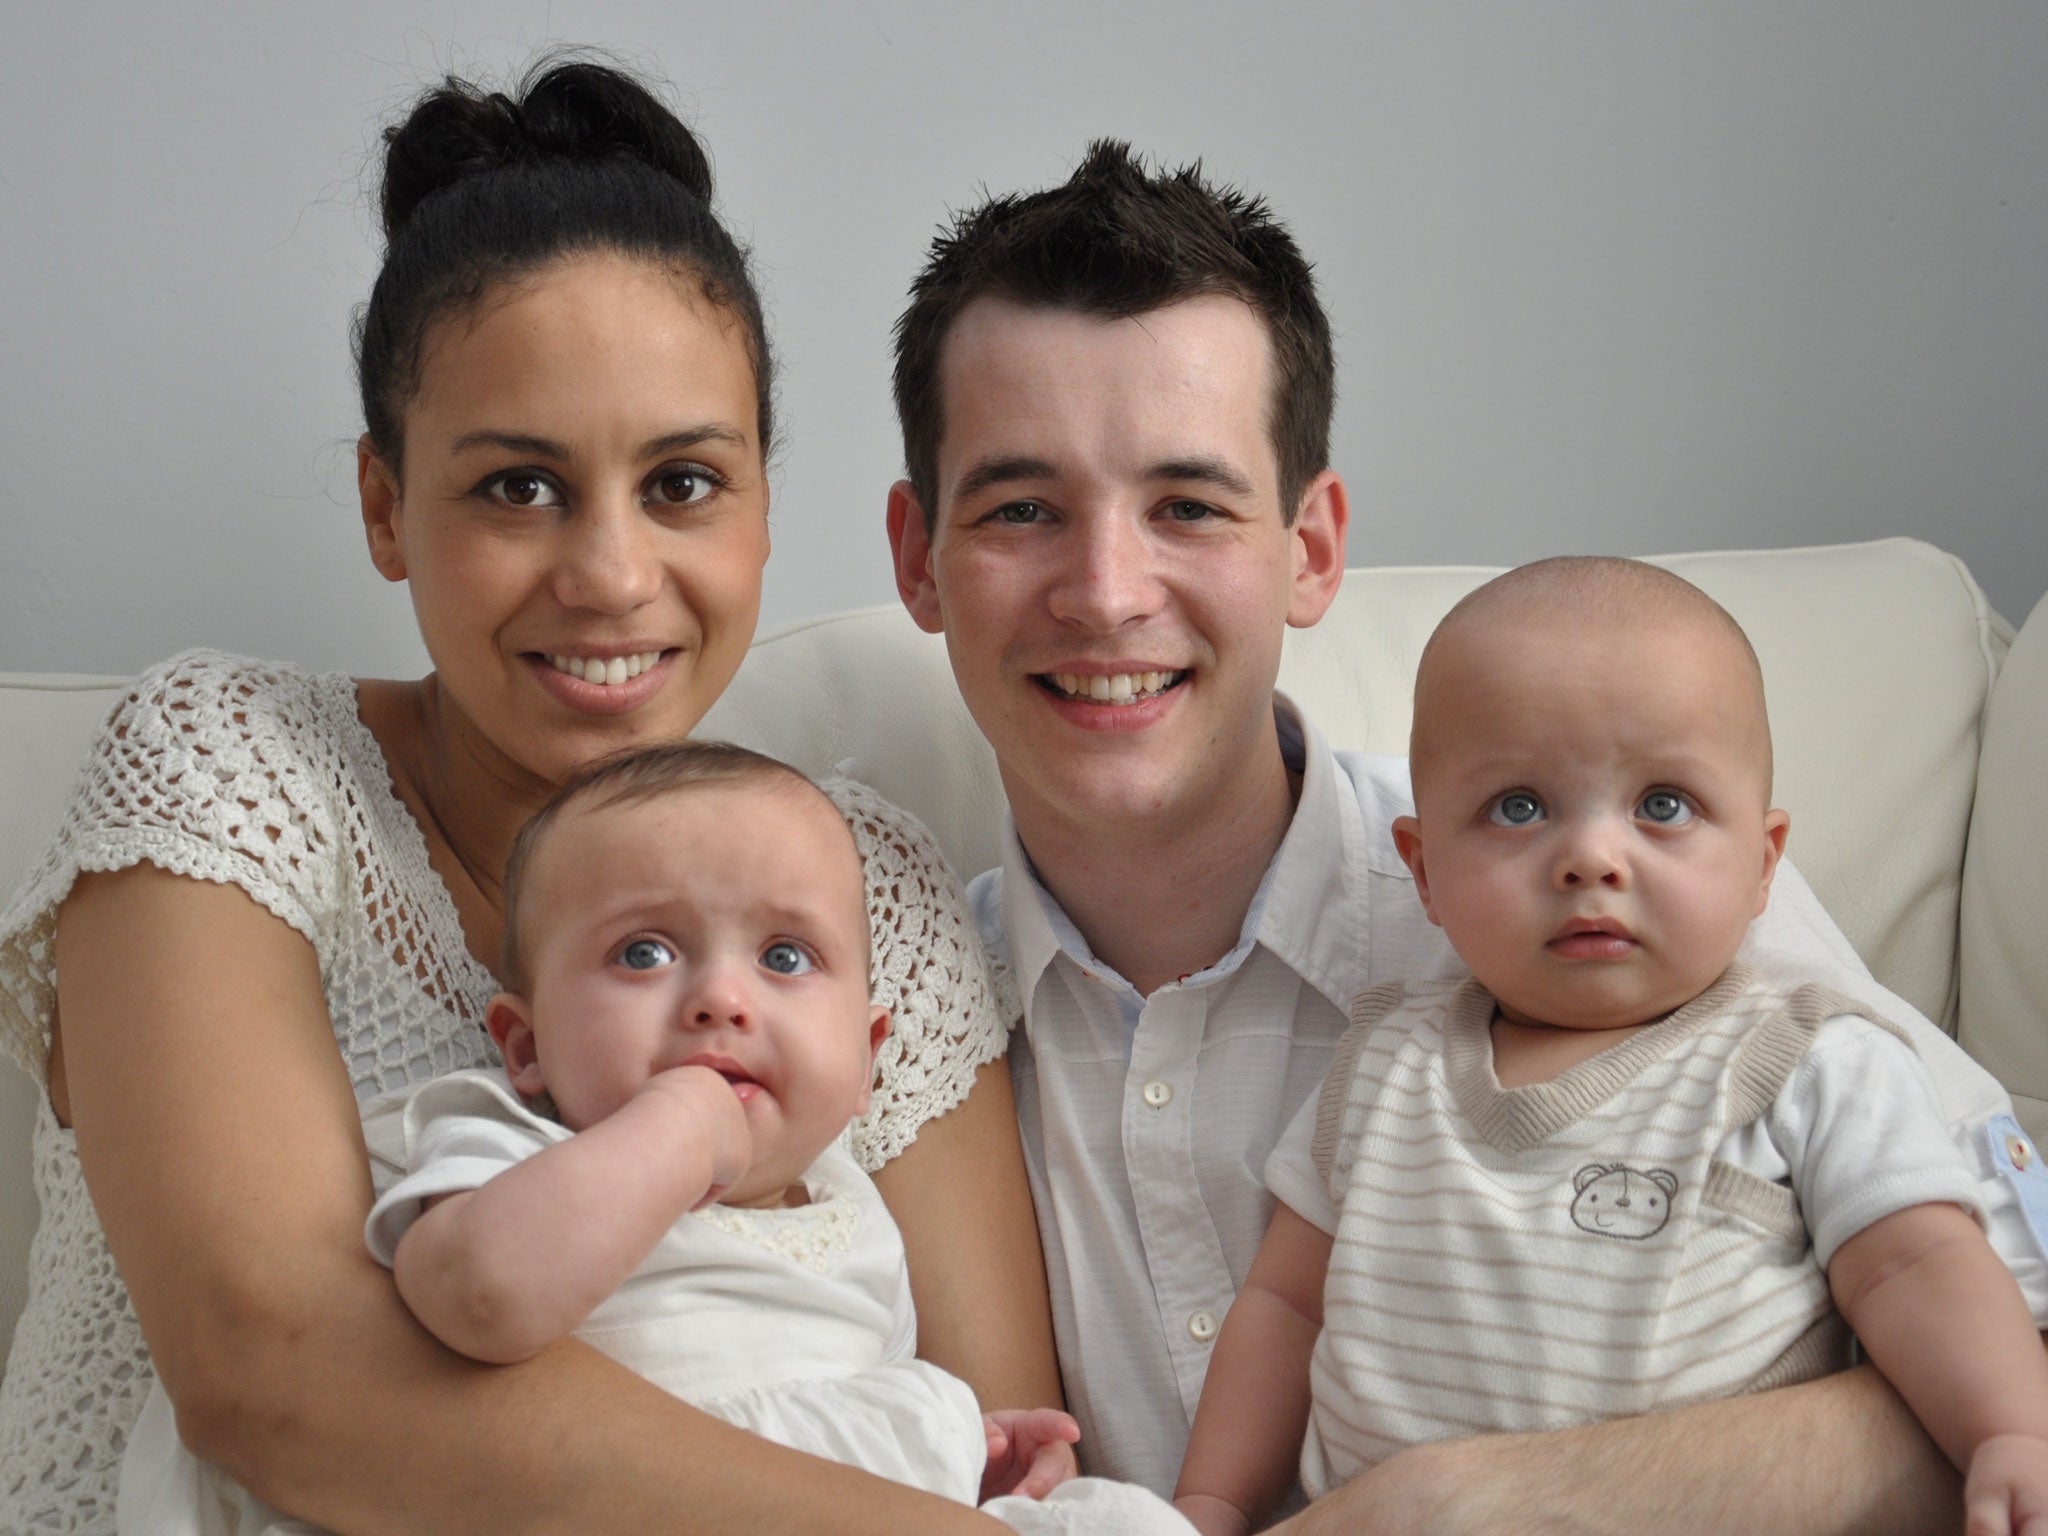 Ben D’Alton, 27, from Morecambe, works part time as a technician for an energy firm so he can help his wife, Fiona, 31, look after their 10-month-old twins, Nahla and Harvey